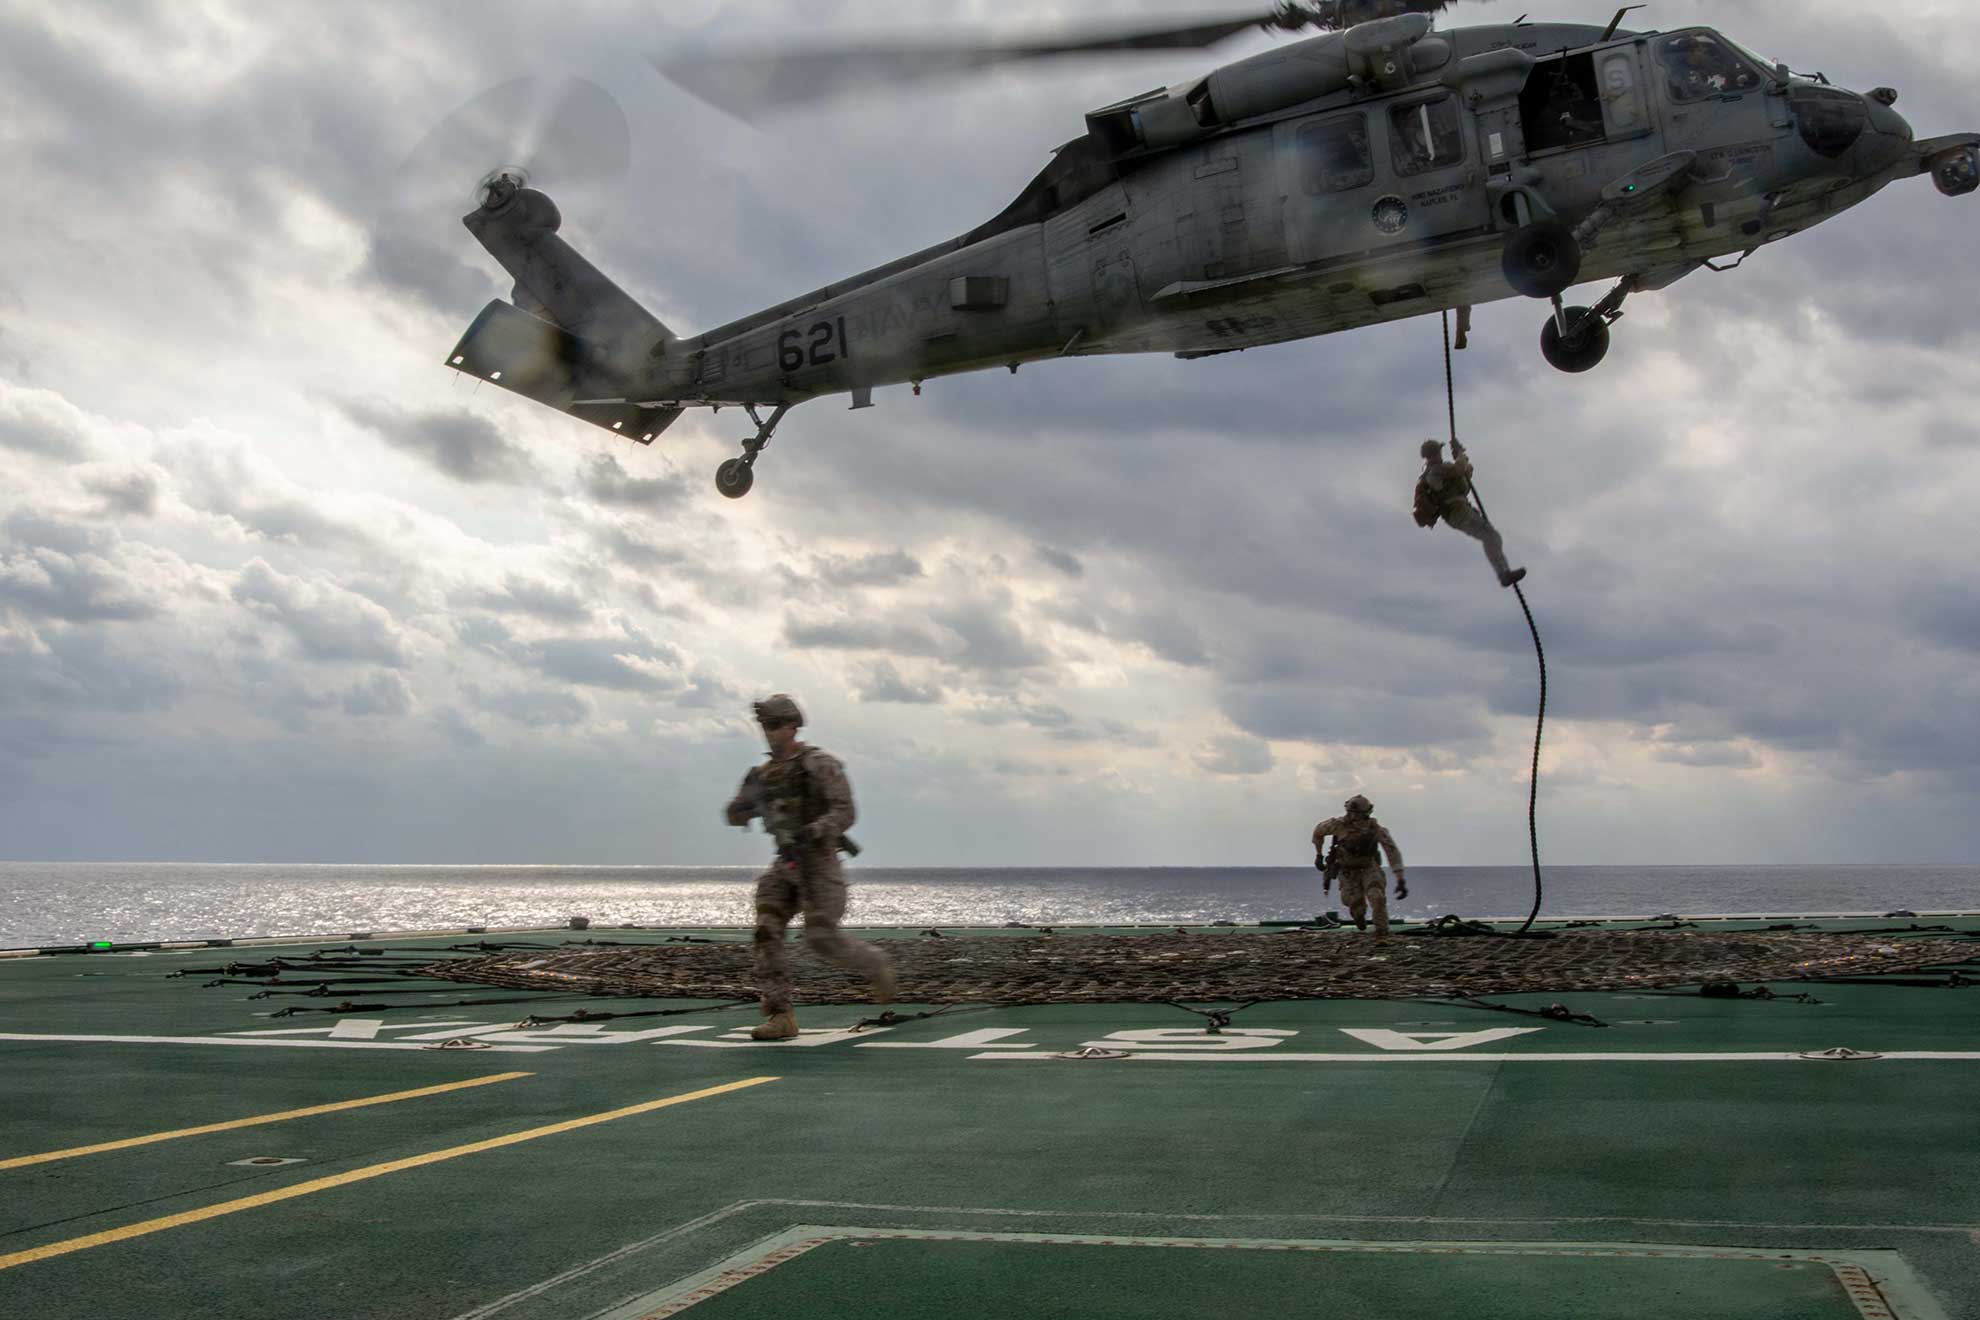 Philippine Sea (Nov. 1, 2018) Sailors assigned to Explosive Ordnance Disposal Unit 5, fast rope from an MH-60S Seahawk helicopter, assigned to Helicopter Sea Combat (HSC) 12, aboard the forward-deployed aircraft carrier USS Ronald Reagan (CVN 76) during exercise Keen Sword 19. Keen Sword is a joint, bilateral field-training exercise involving U.S. military and Japan Maritime Self-Defense Force personnel, designed to increase combat readiness and interoperability of the Japan-U.S. alliance -- U.S. Navy photo by MCS3 Erwin Jacob V. Miciano. -